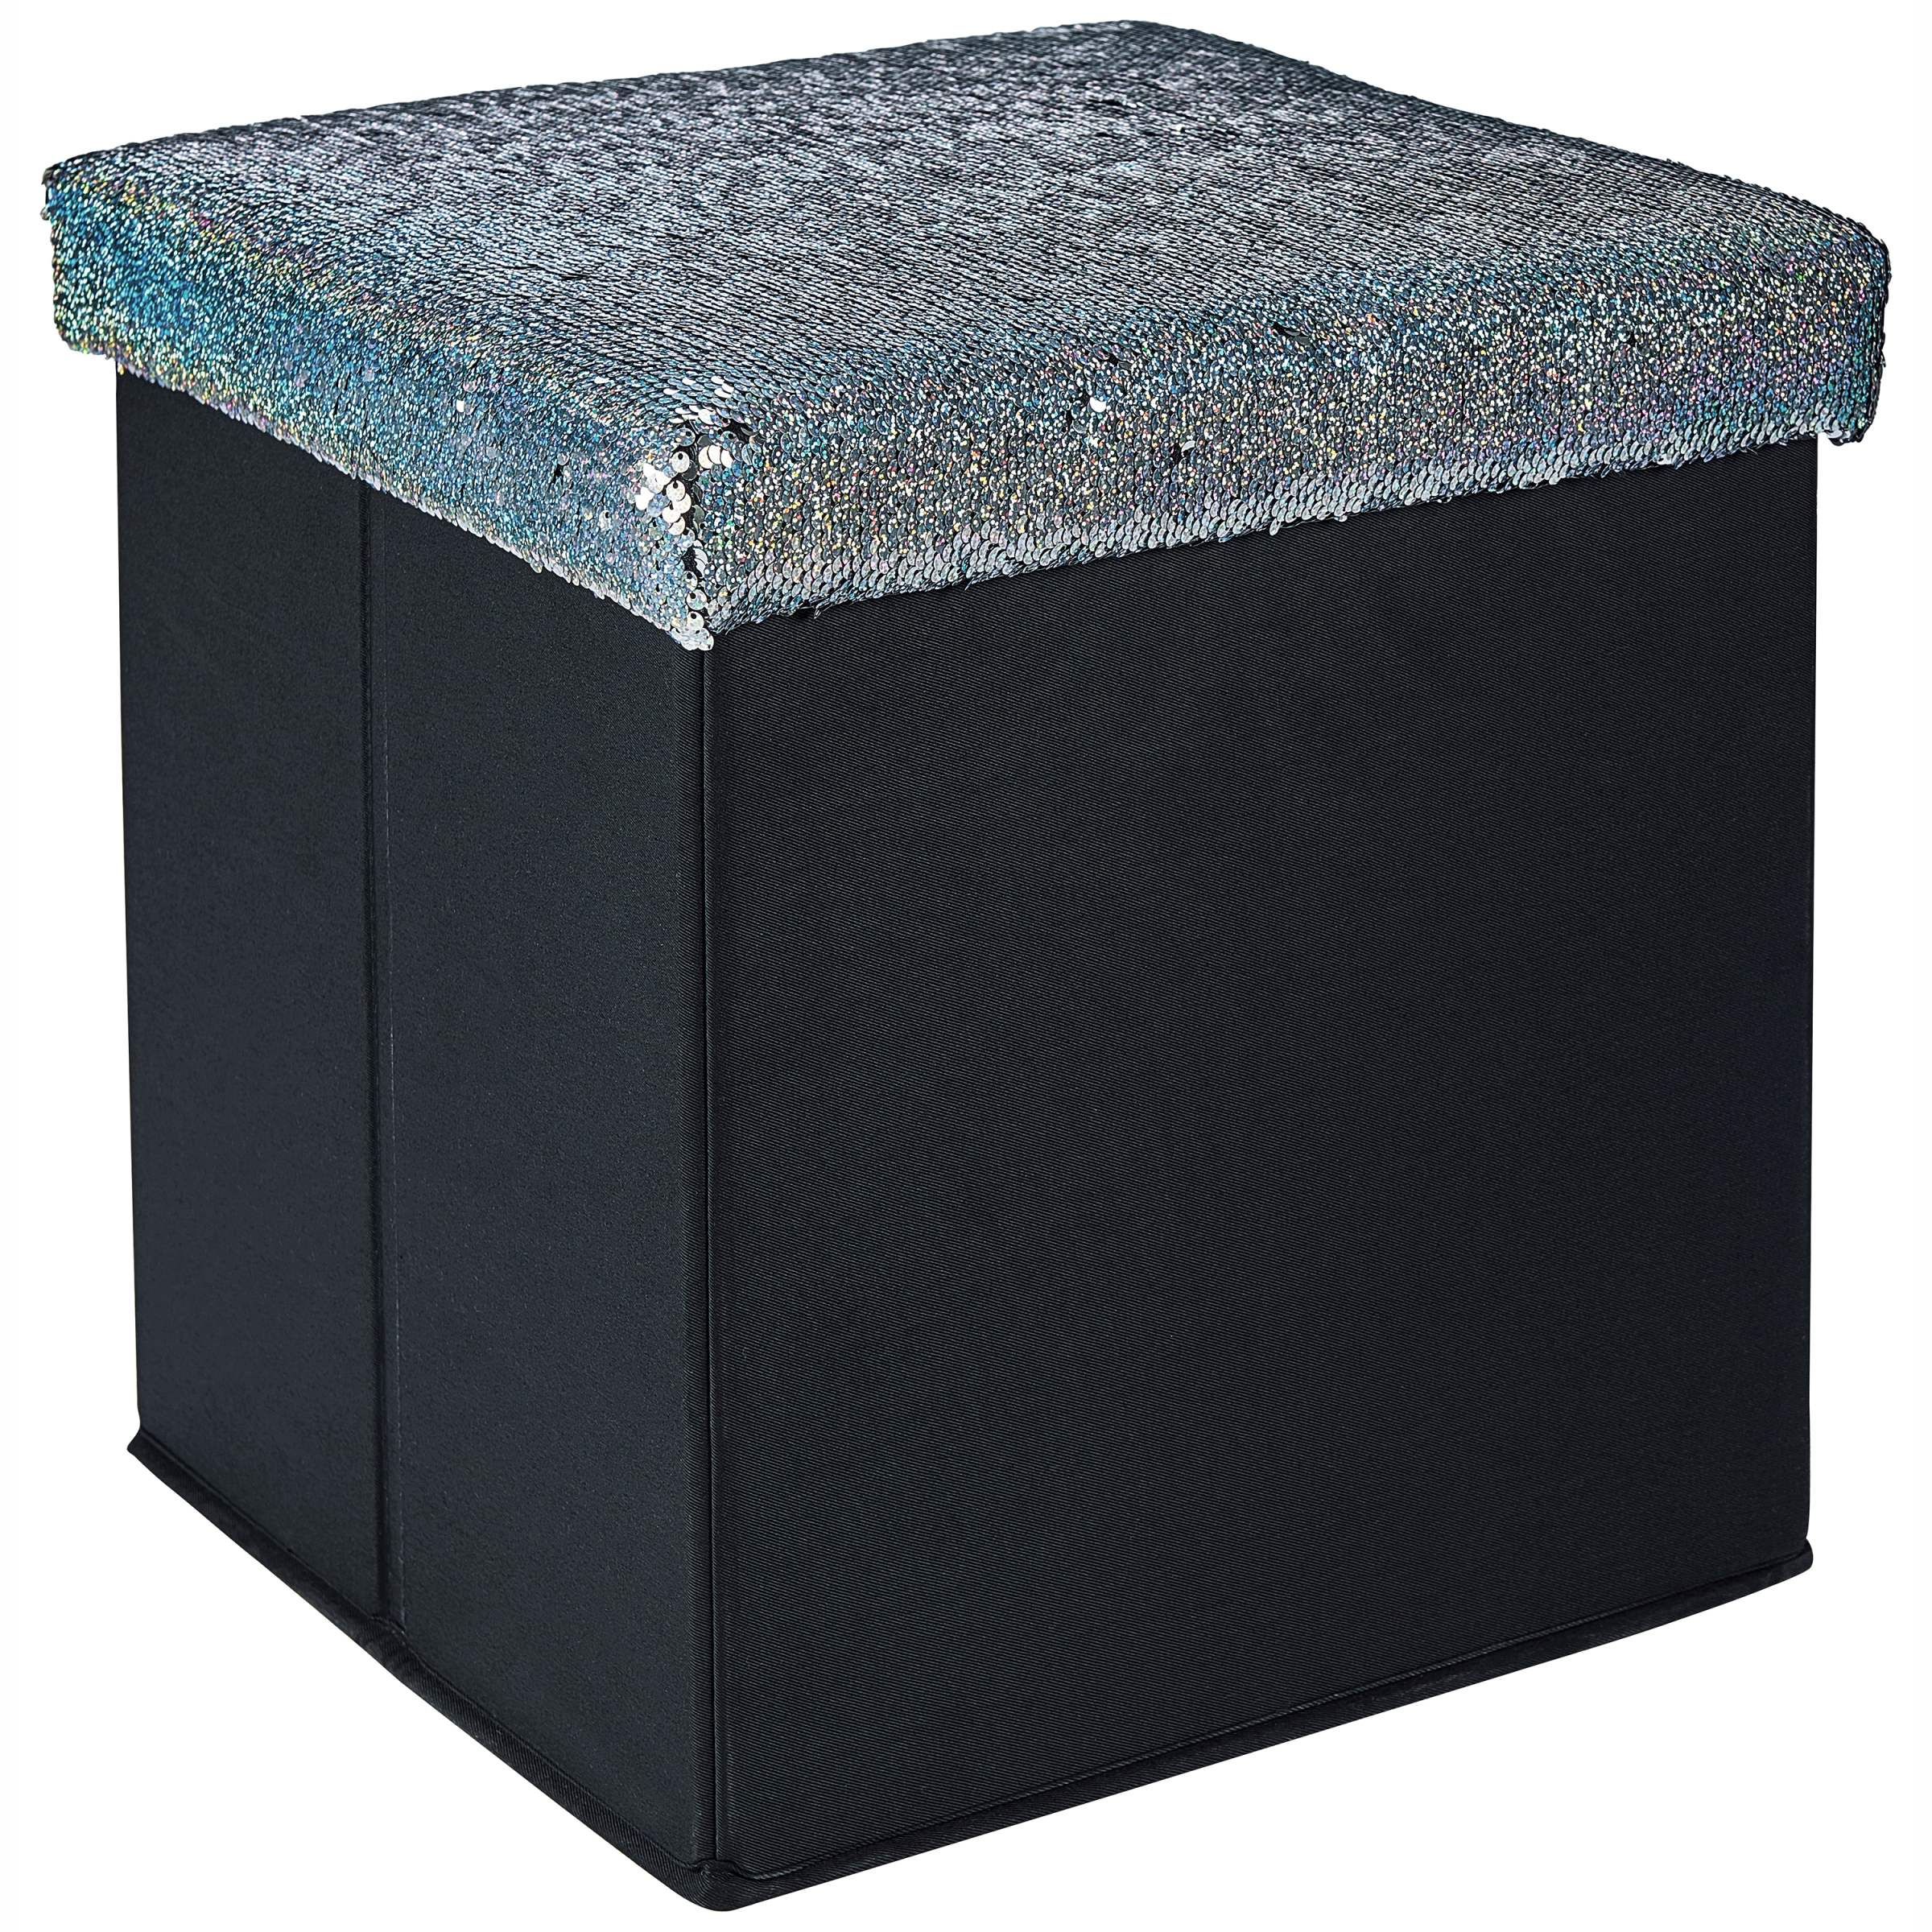 Famous Mainstays Collapsible Storage Ottoman, Aqua Glitter Sequins – Walmart In Ottomans With Sequins (View 1 of 10)